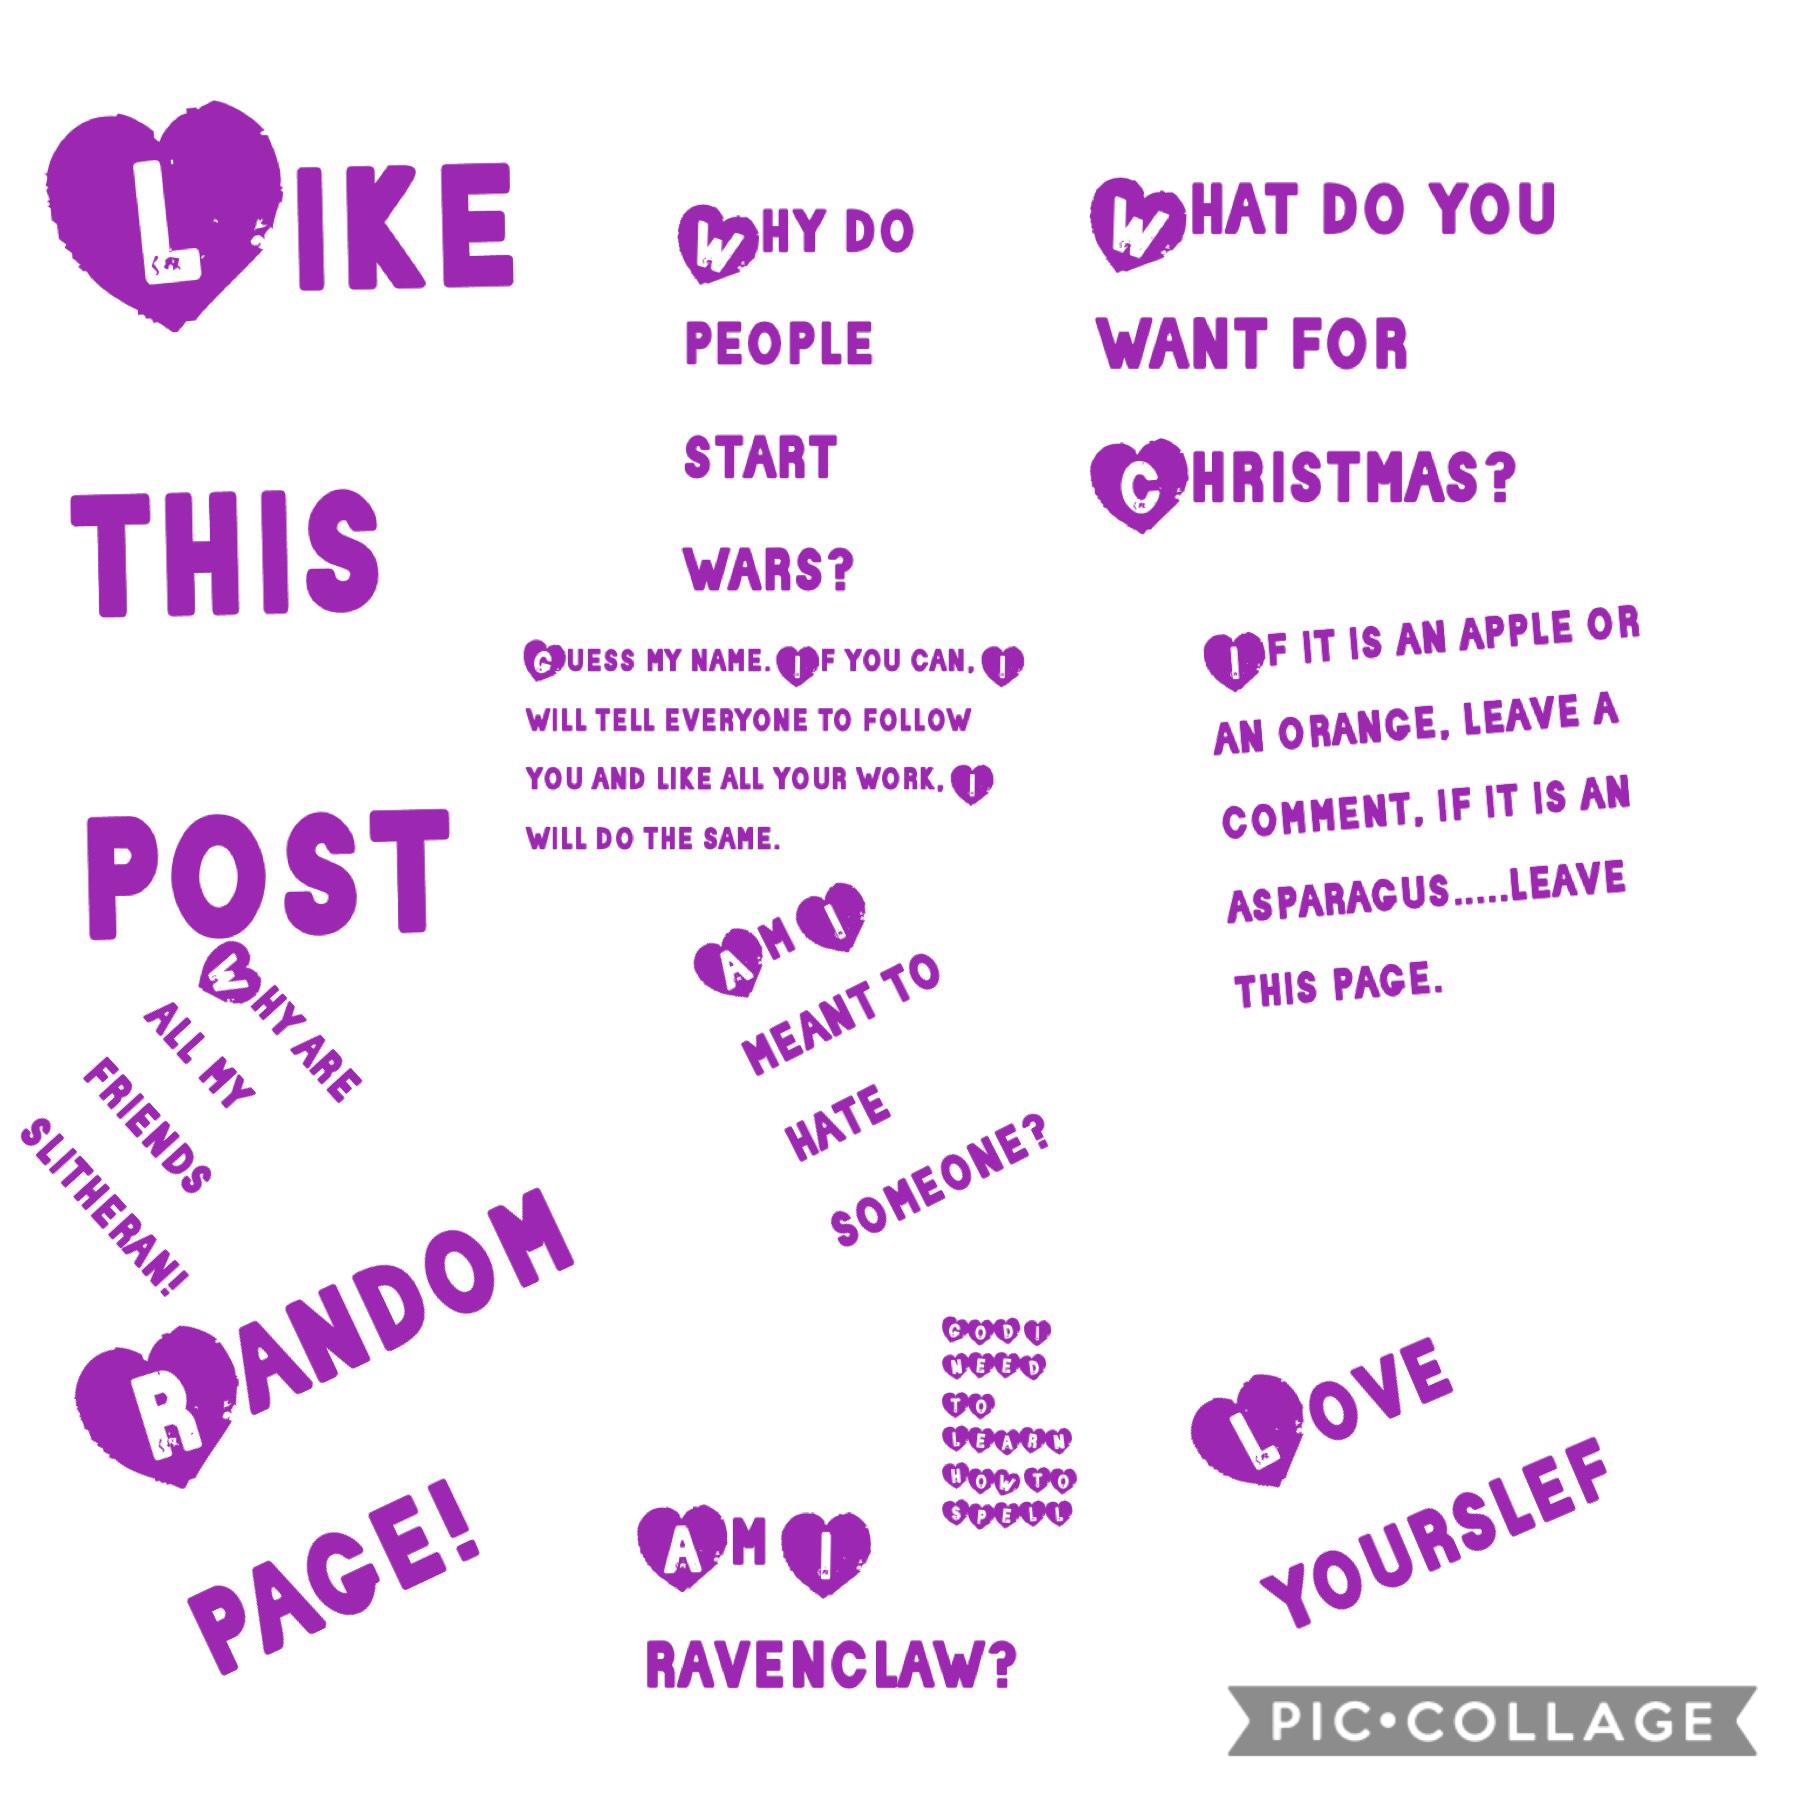 Random page. Bored? Challenge? WANT LIKES OR FOLLOWS?